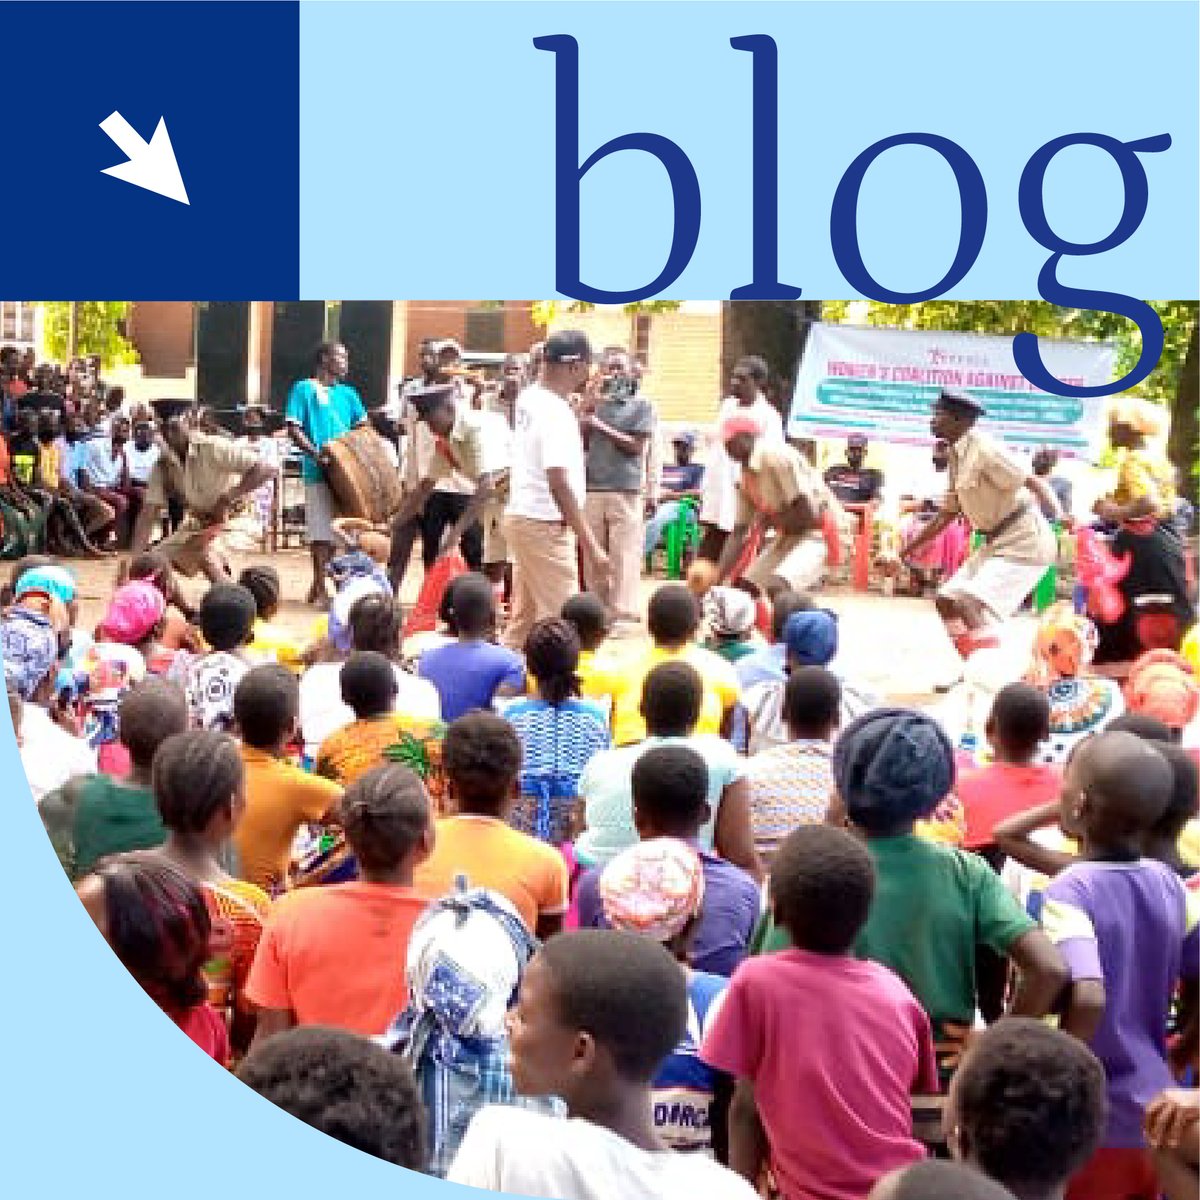 New on the blog, learn how @wocacamw the Women’s Coalition Against Cancer used their Health Equity Grant to explore the colorectal cancer needs in Malawi. gcca.info/_Blog_Post_3_2… #GCCAblog #wocaca #wocacawomen #crchealthequitygrants #colorectalcancer